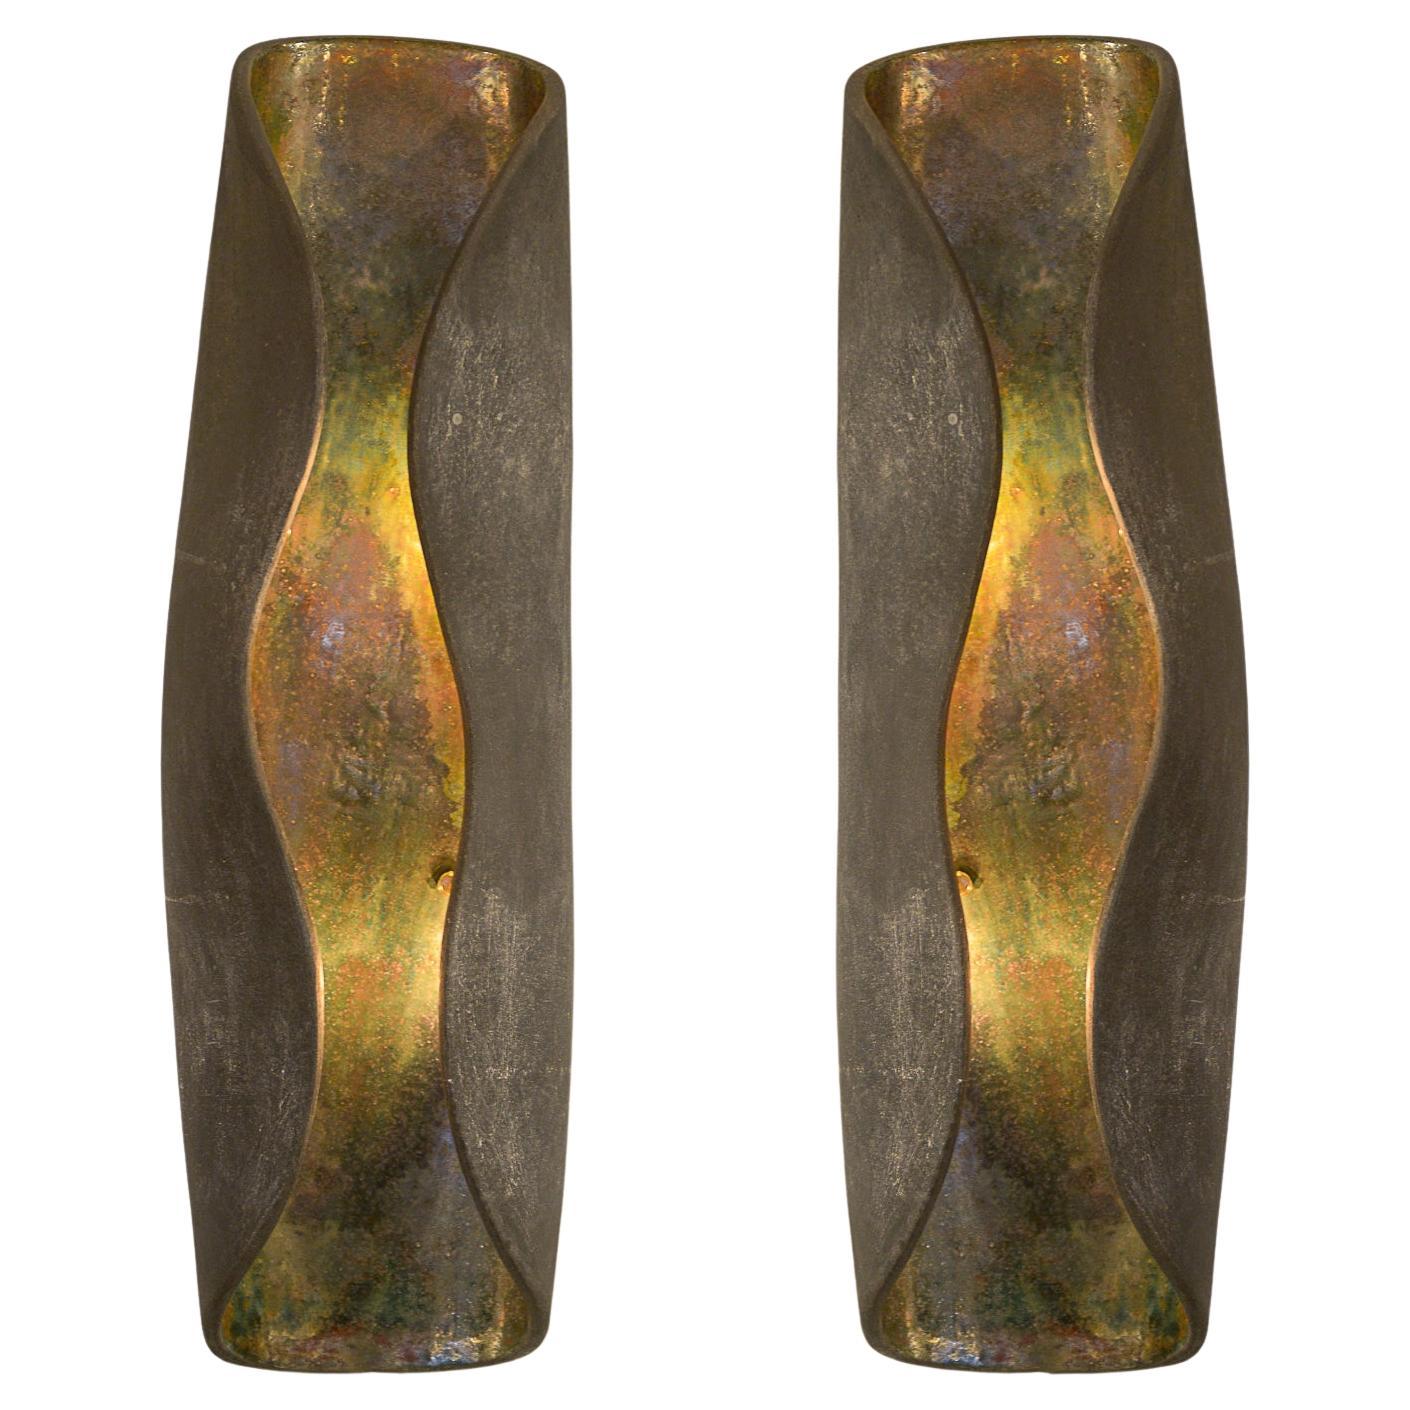 Pair of French Bespoke Sculptural Ceramic Sconces